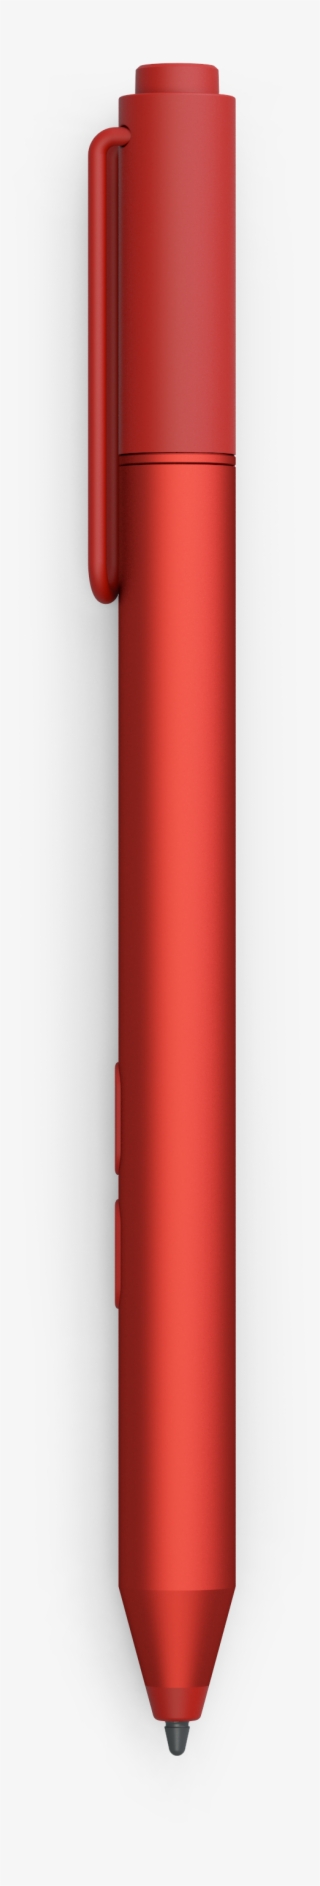 Surface Pen Red